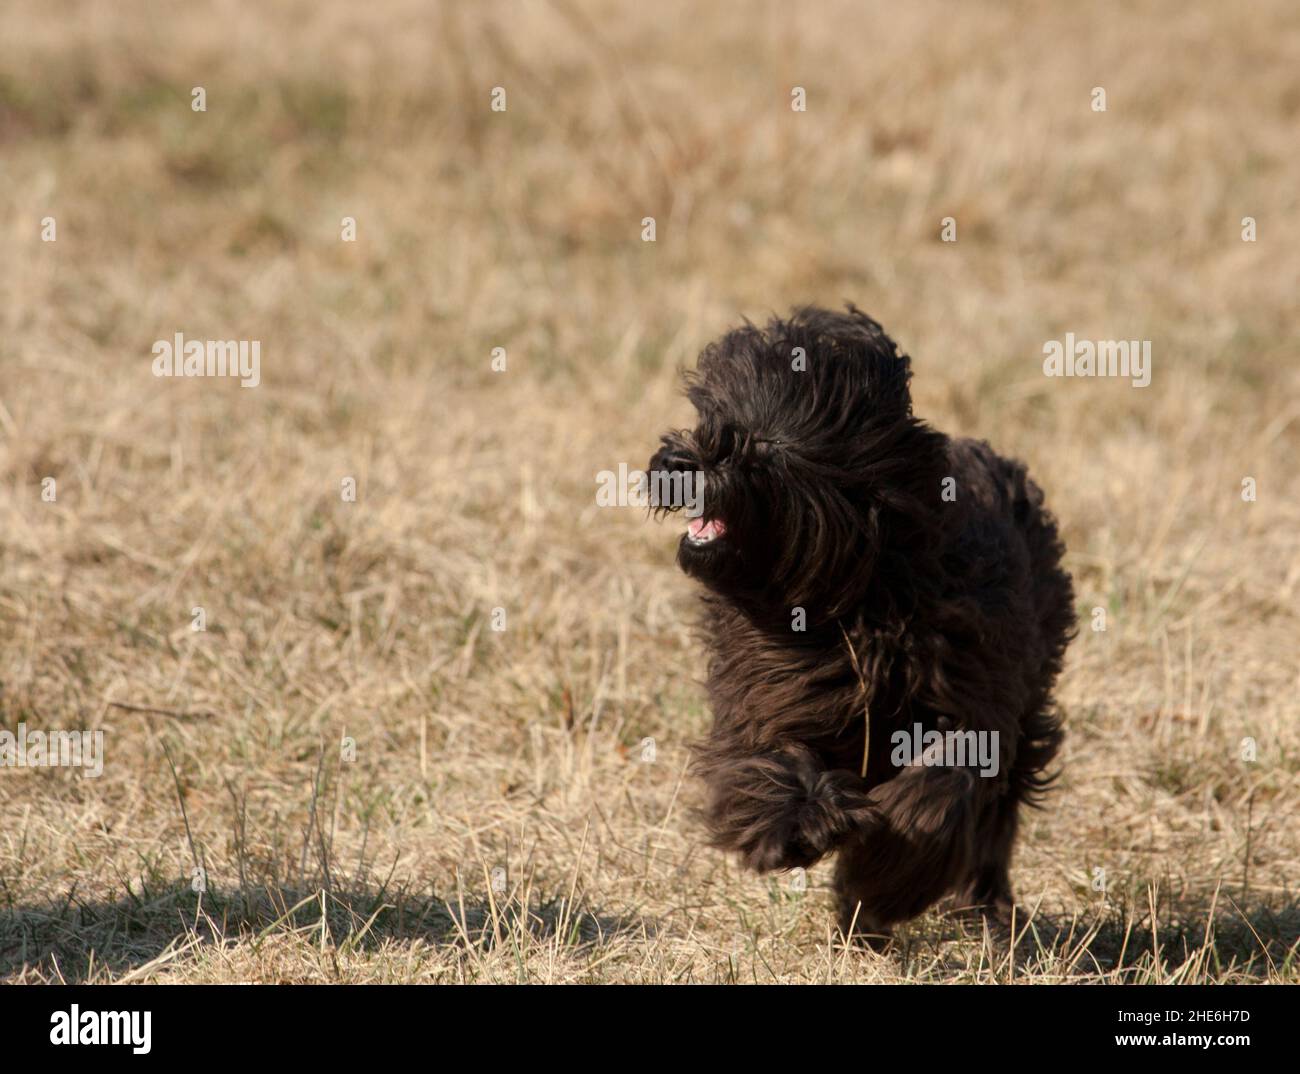 A Black miniature Poodle running in the sun Stock Photo